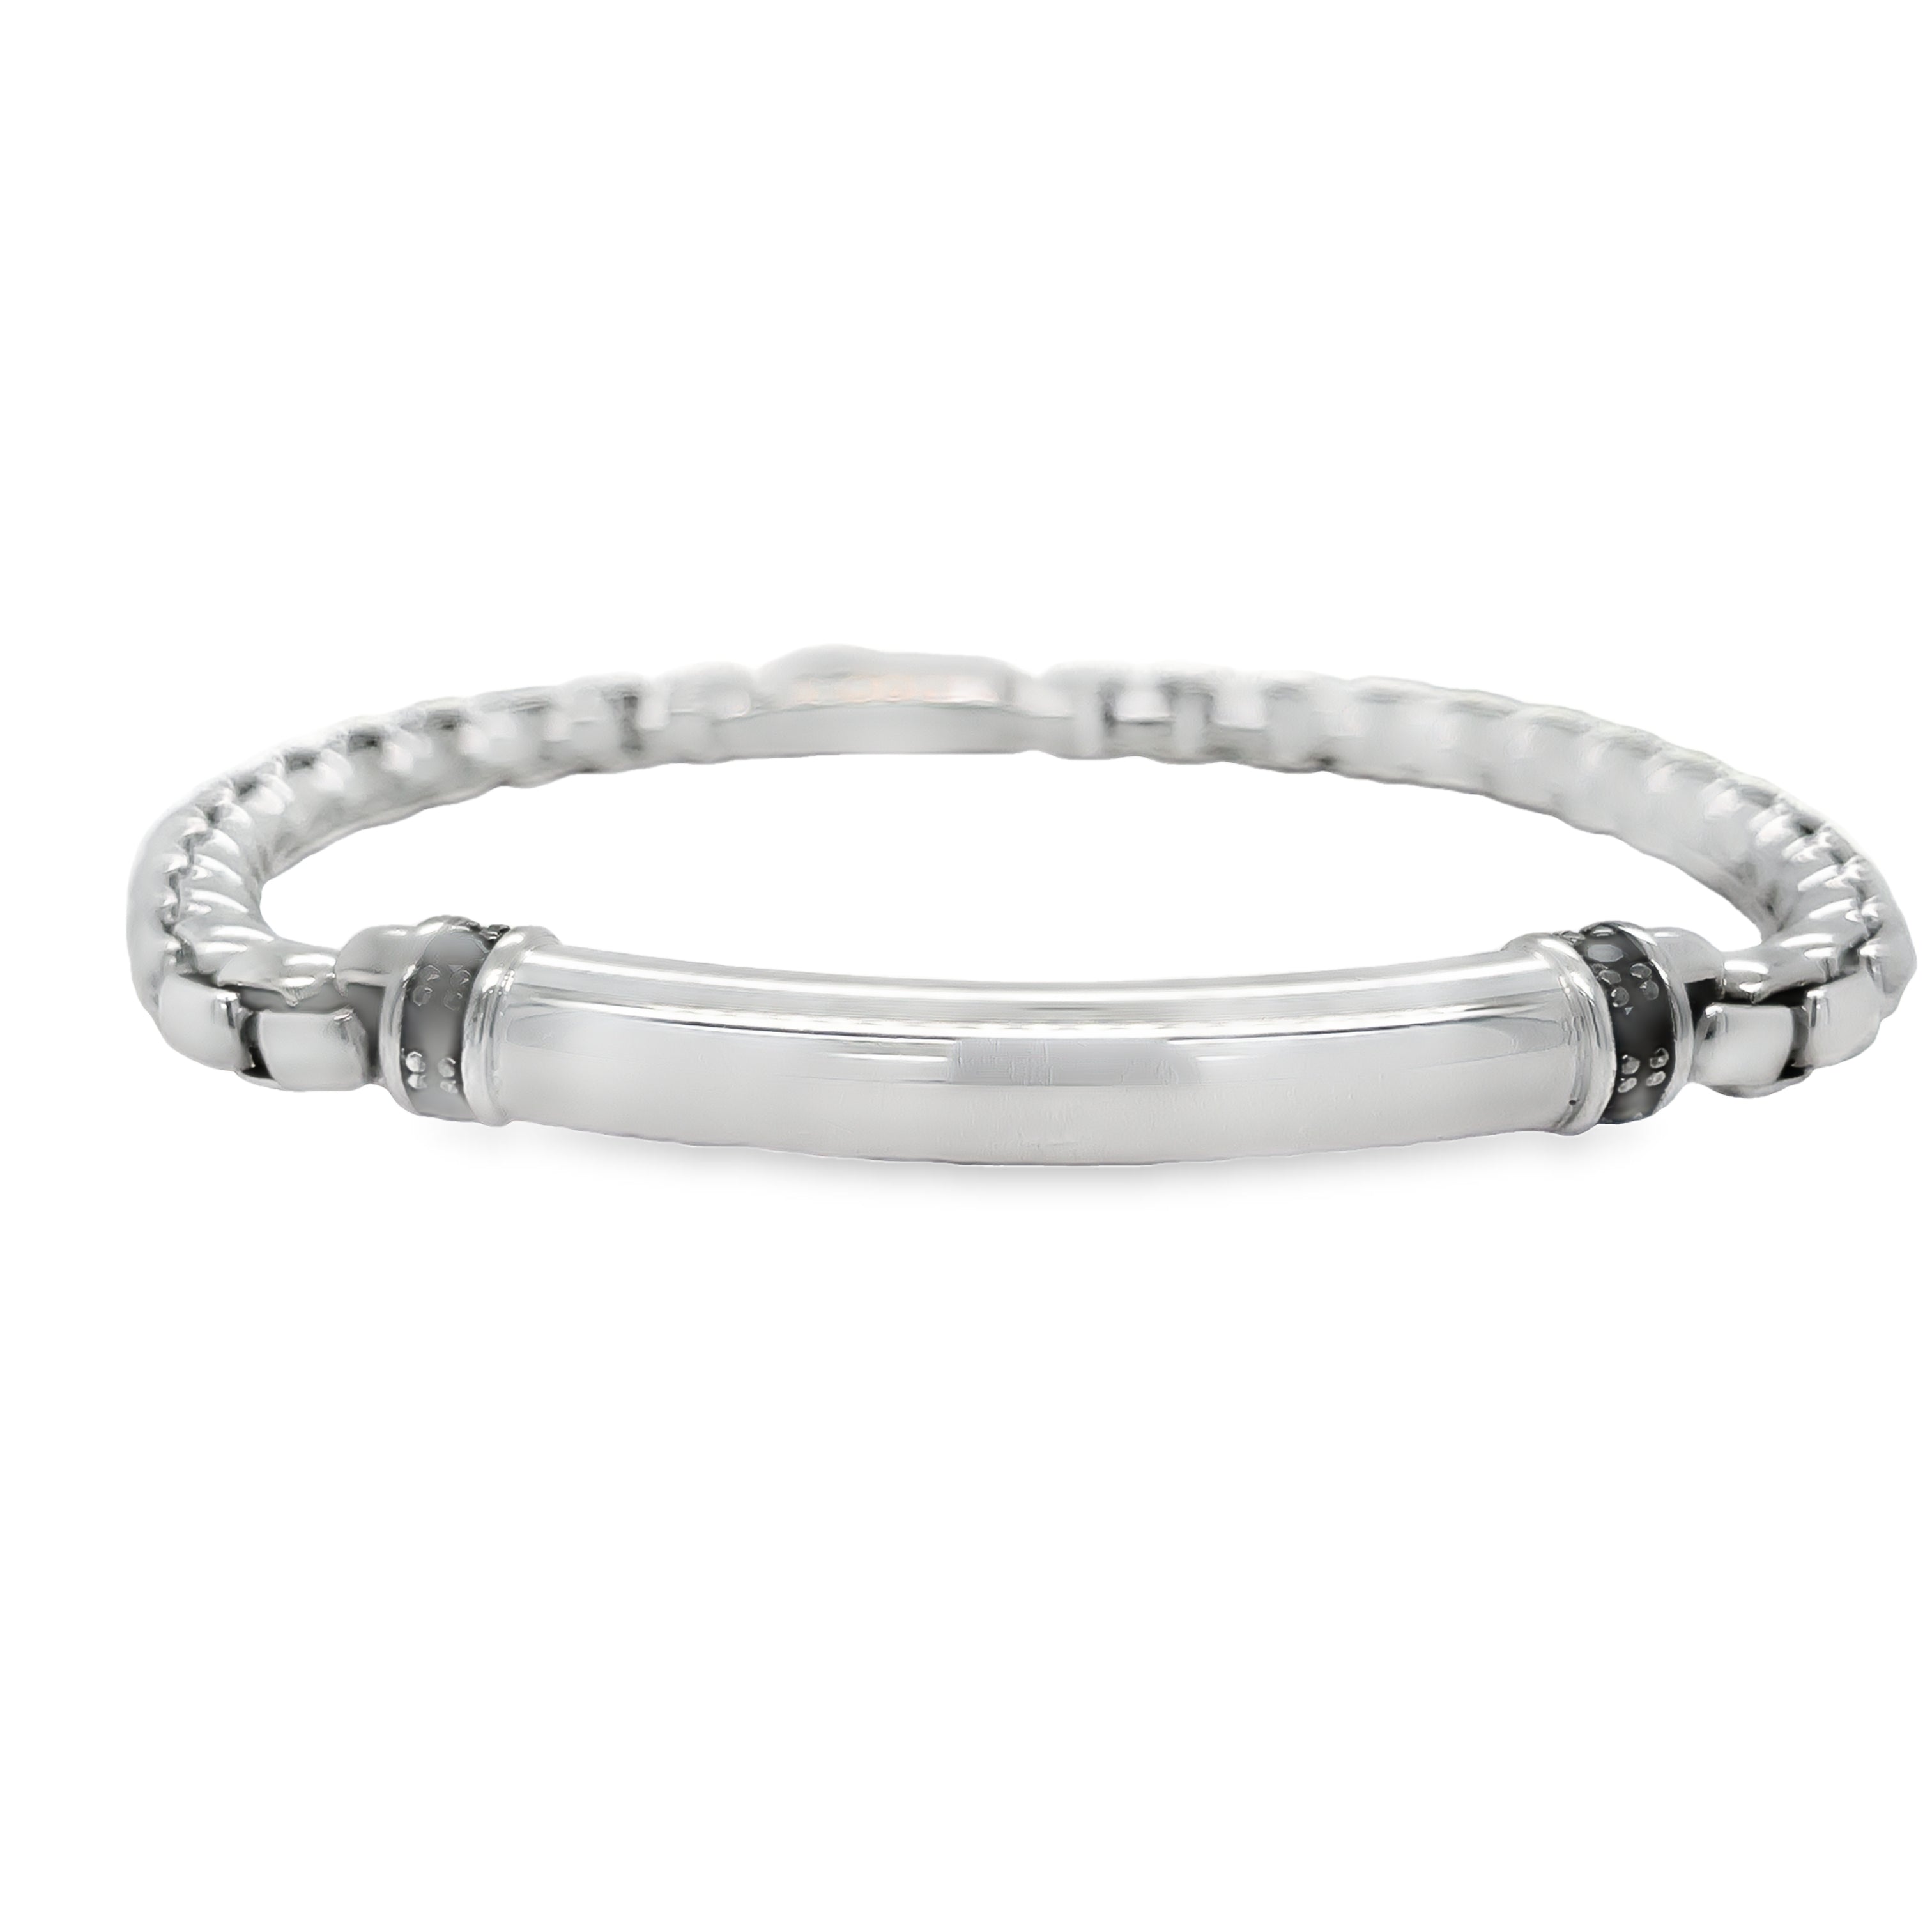 Crafted in Italy, the Zancan Curved Bar Solid Bracelet with round spinels is a sleek addition to the mens collection. The 925-silver design is enhanced with a striking black and white rhodium burnishing, exuding elegance and sophistication. Elevate your style with this expertly crafted bracelet.